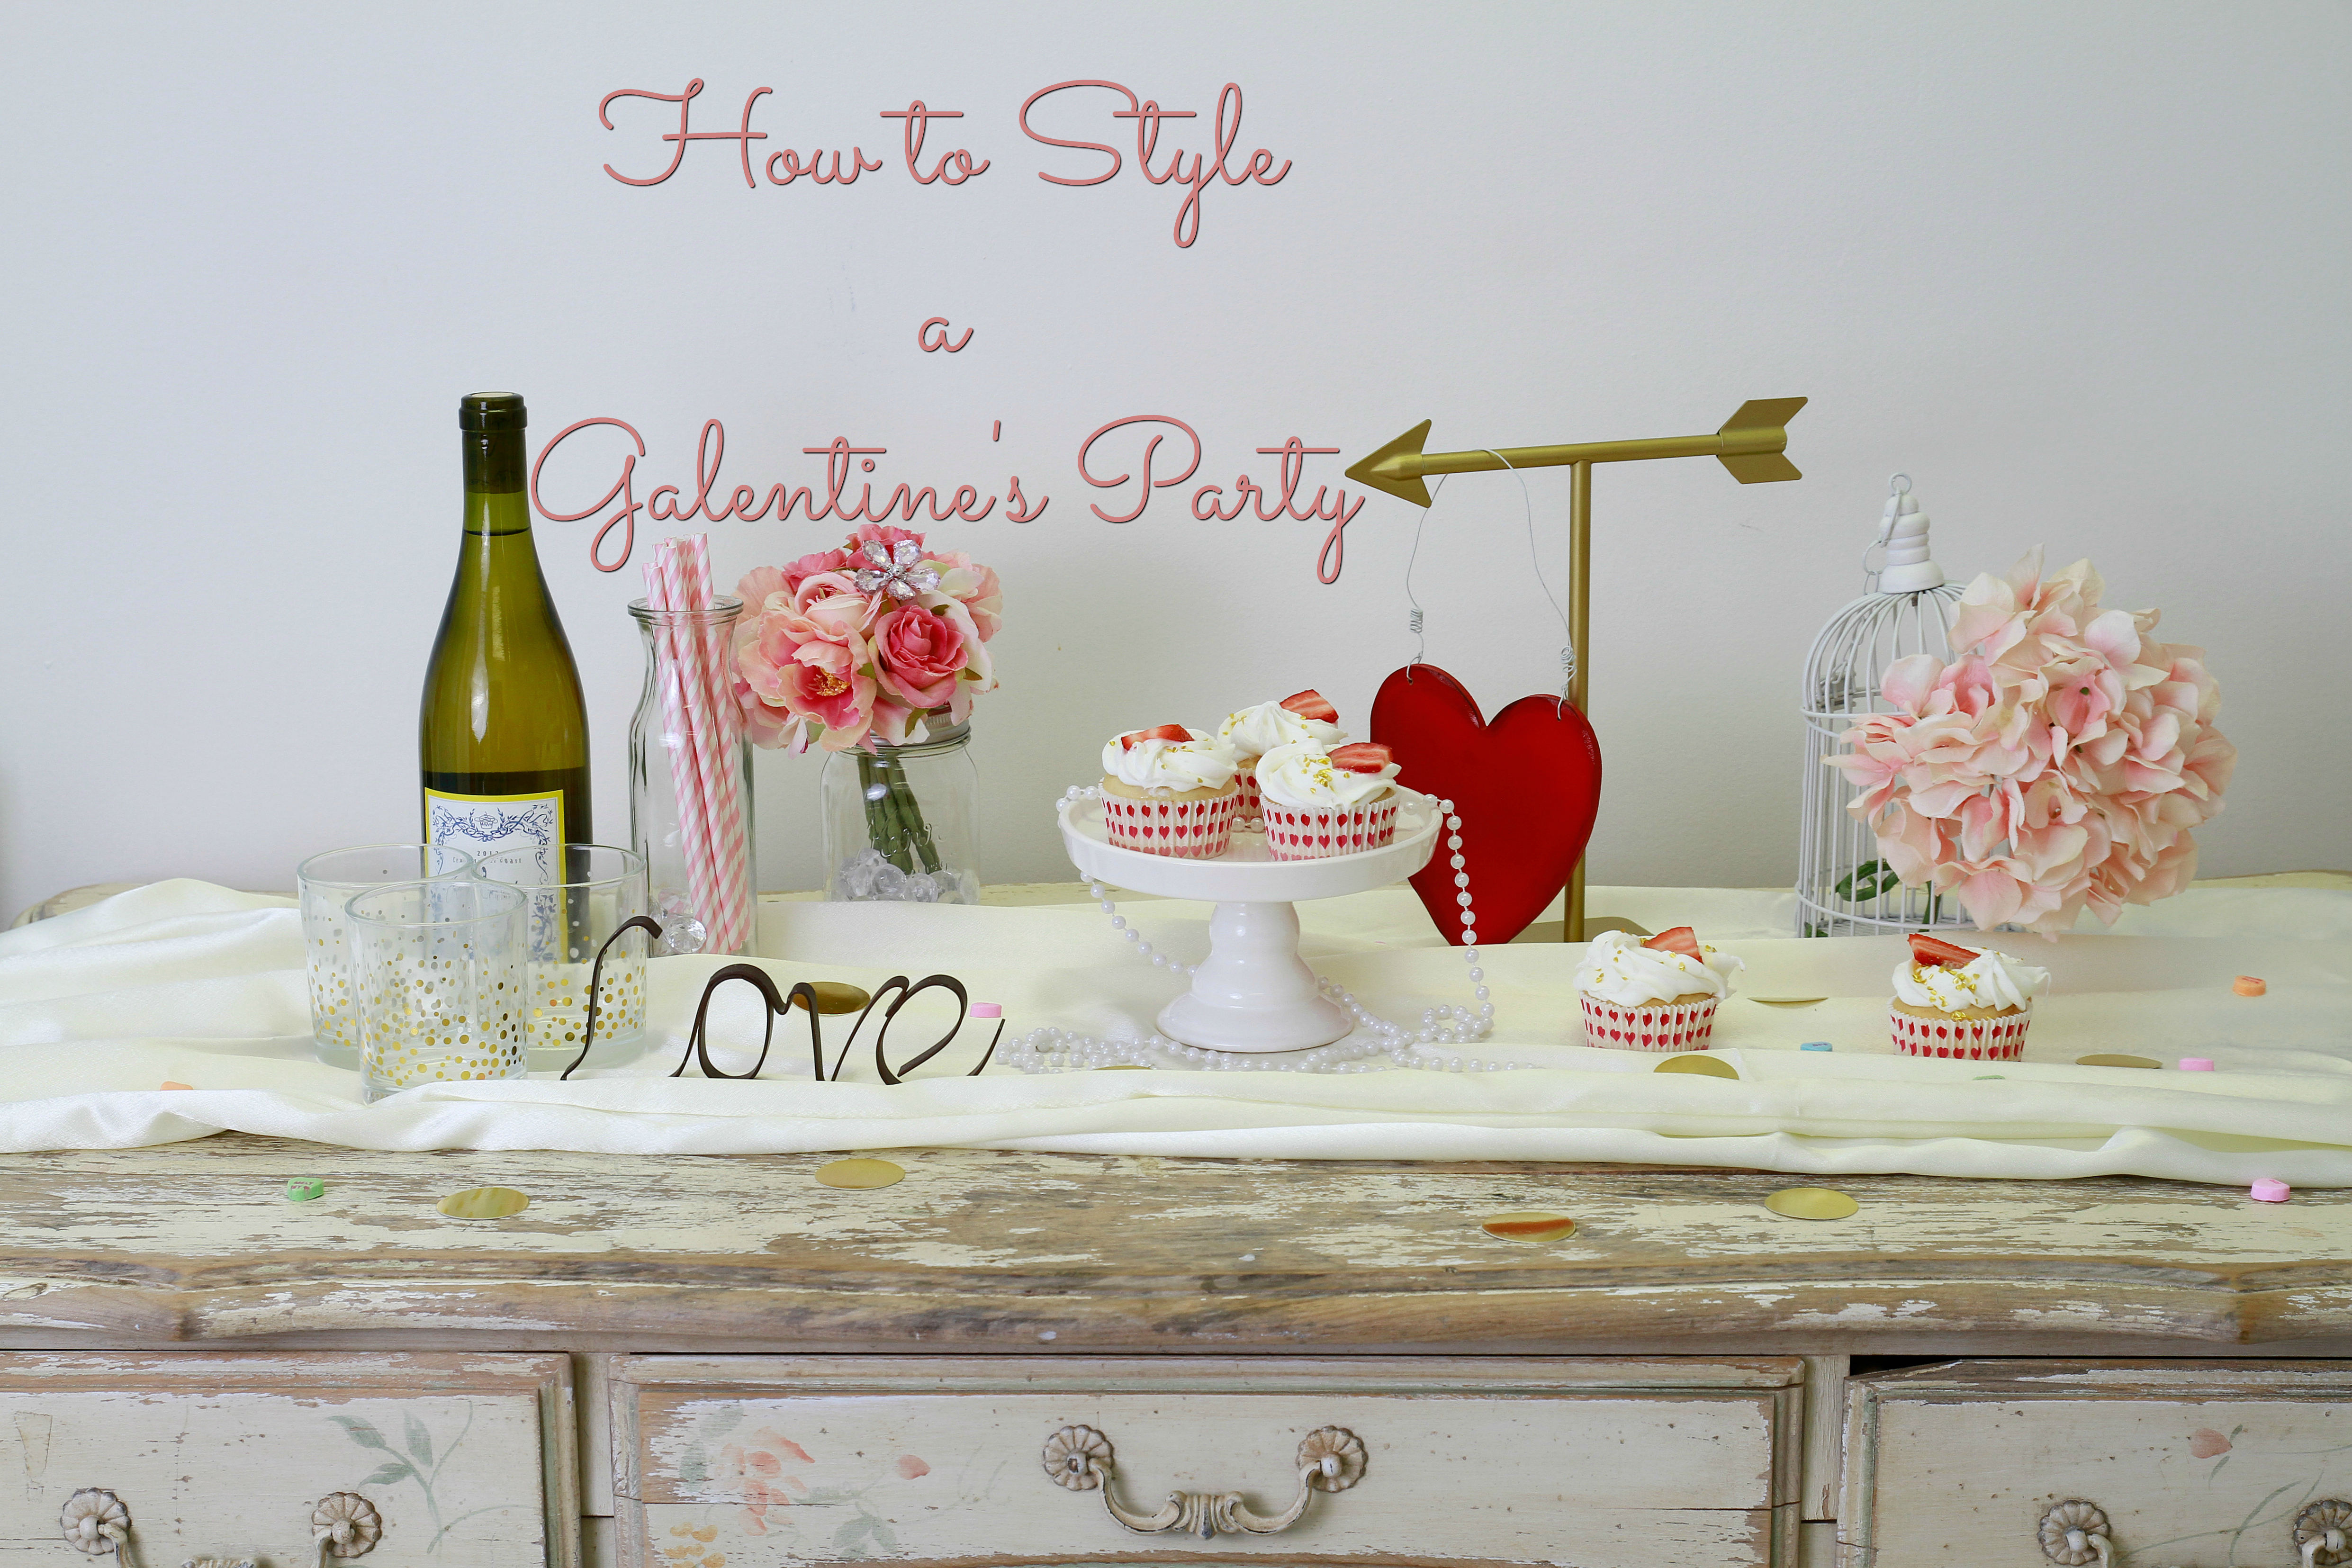 How to Style a Galentine’s Day Party